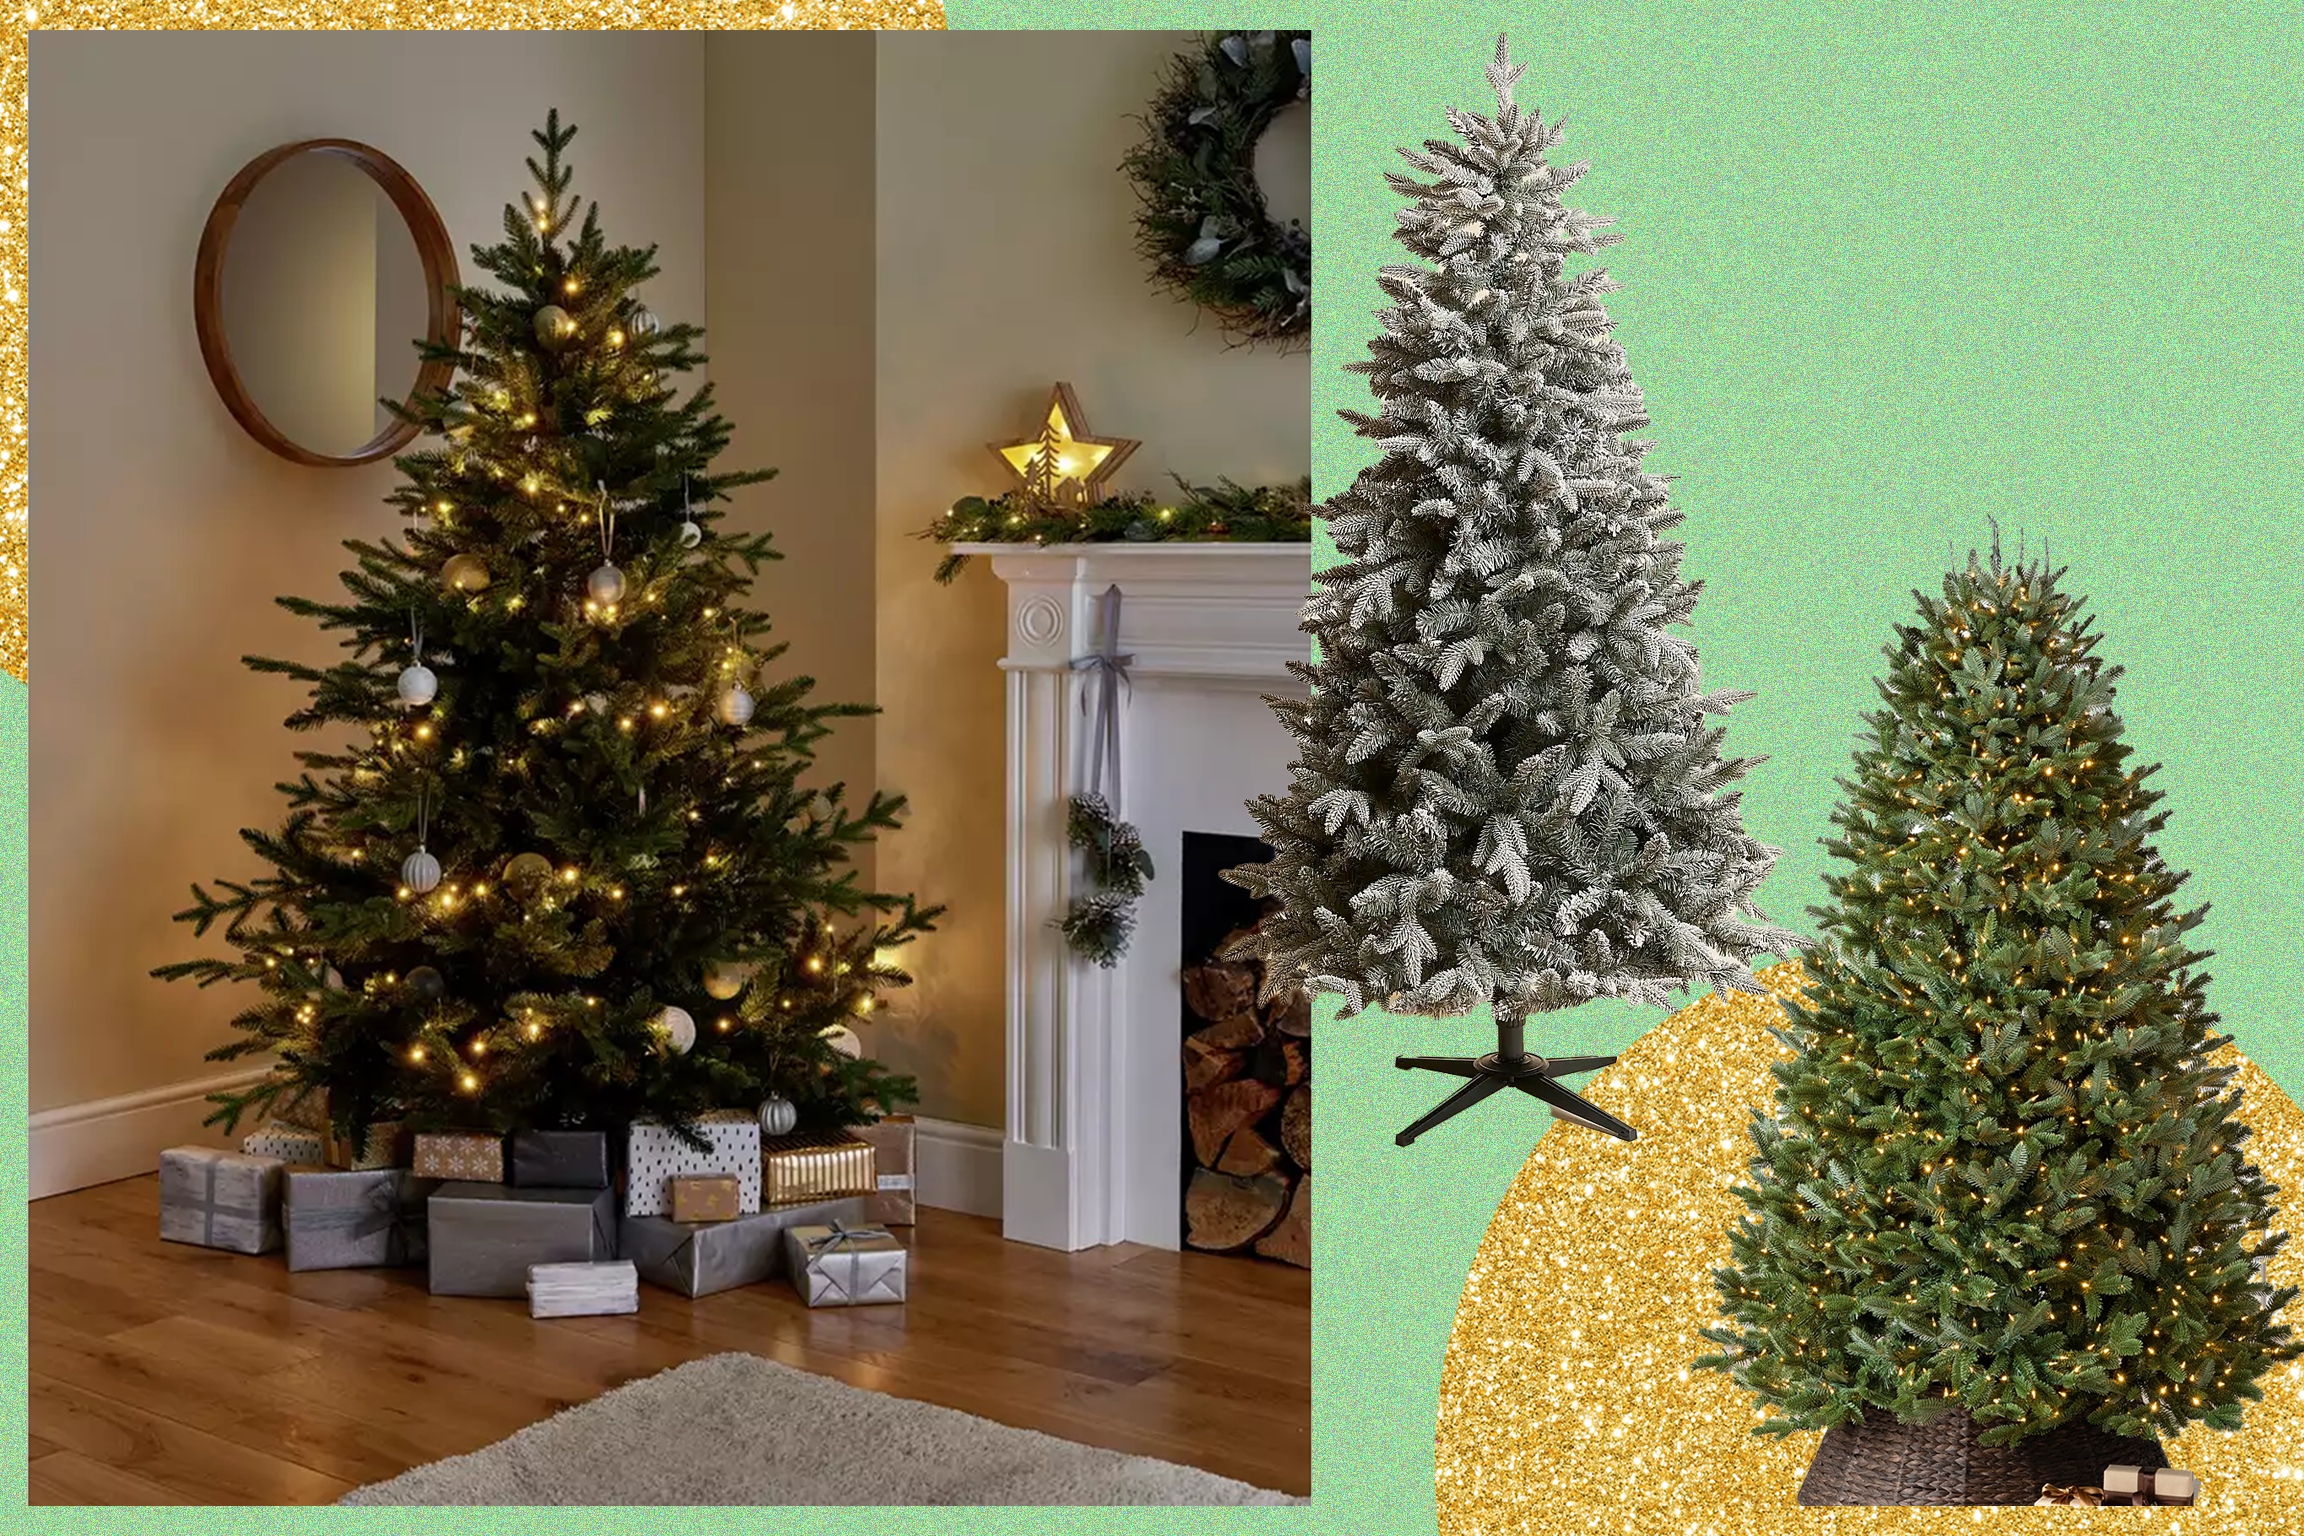 The 7 Best Christmas Tree Stands of 2022, According to Reviews